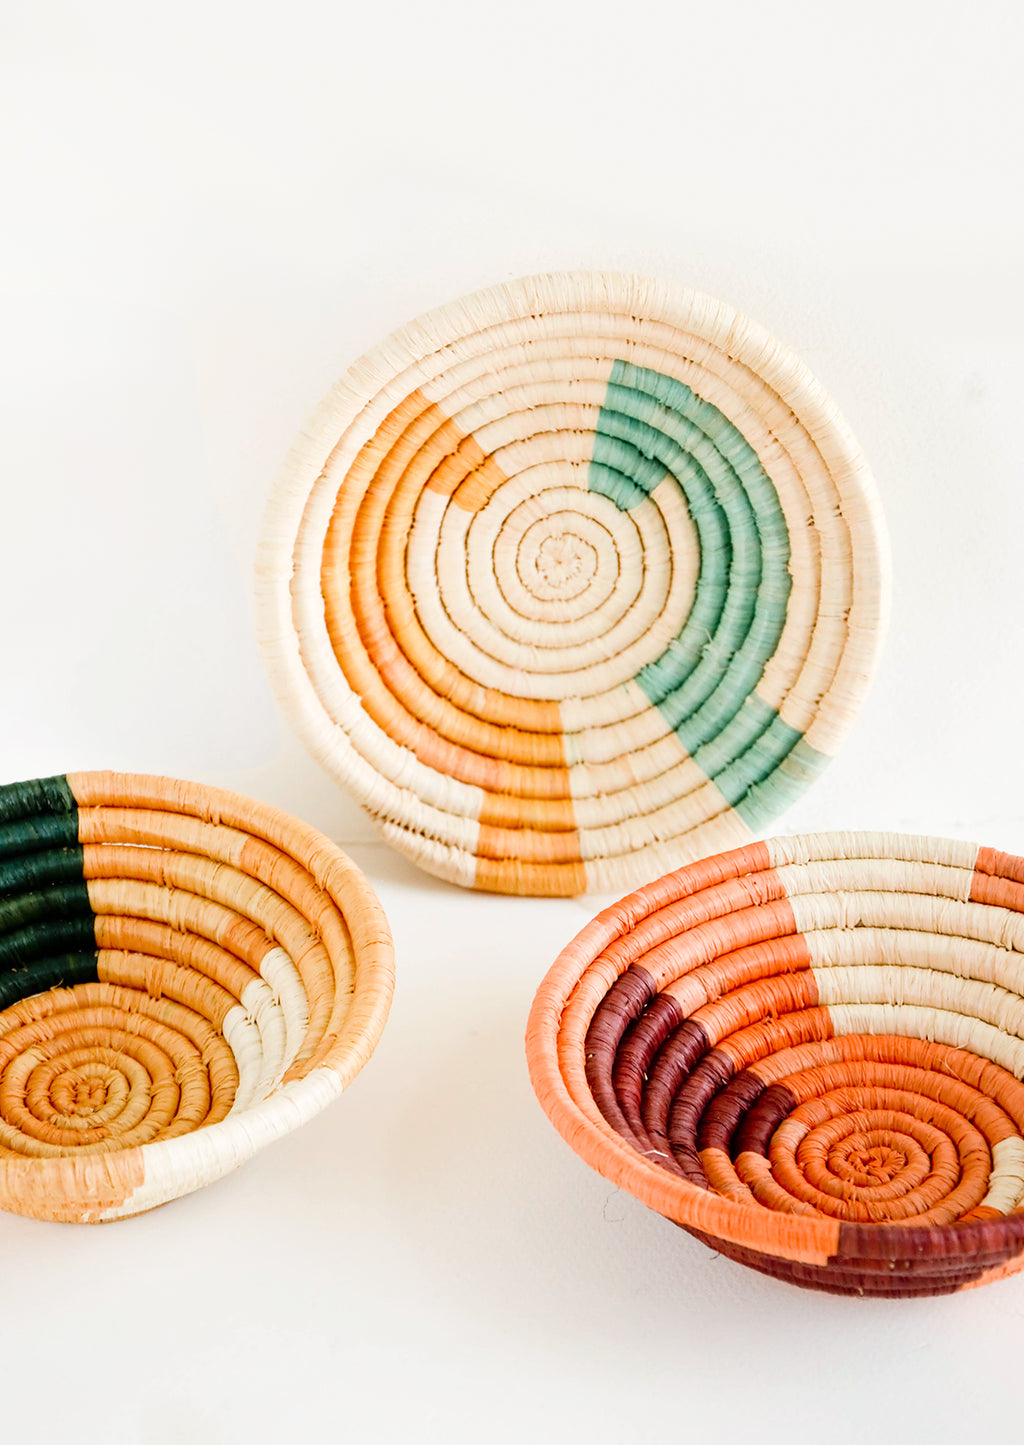 1: Assortment of three woven raffia bowls in a mix of color combos